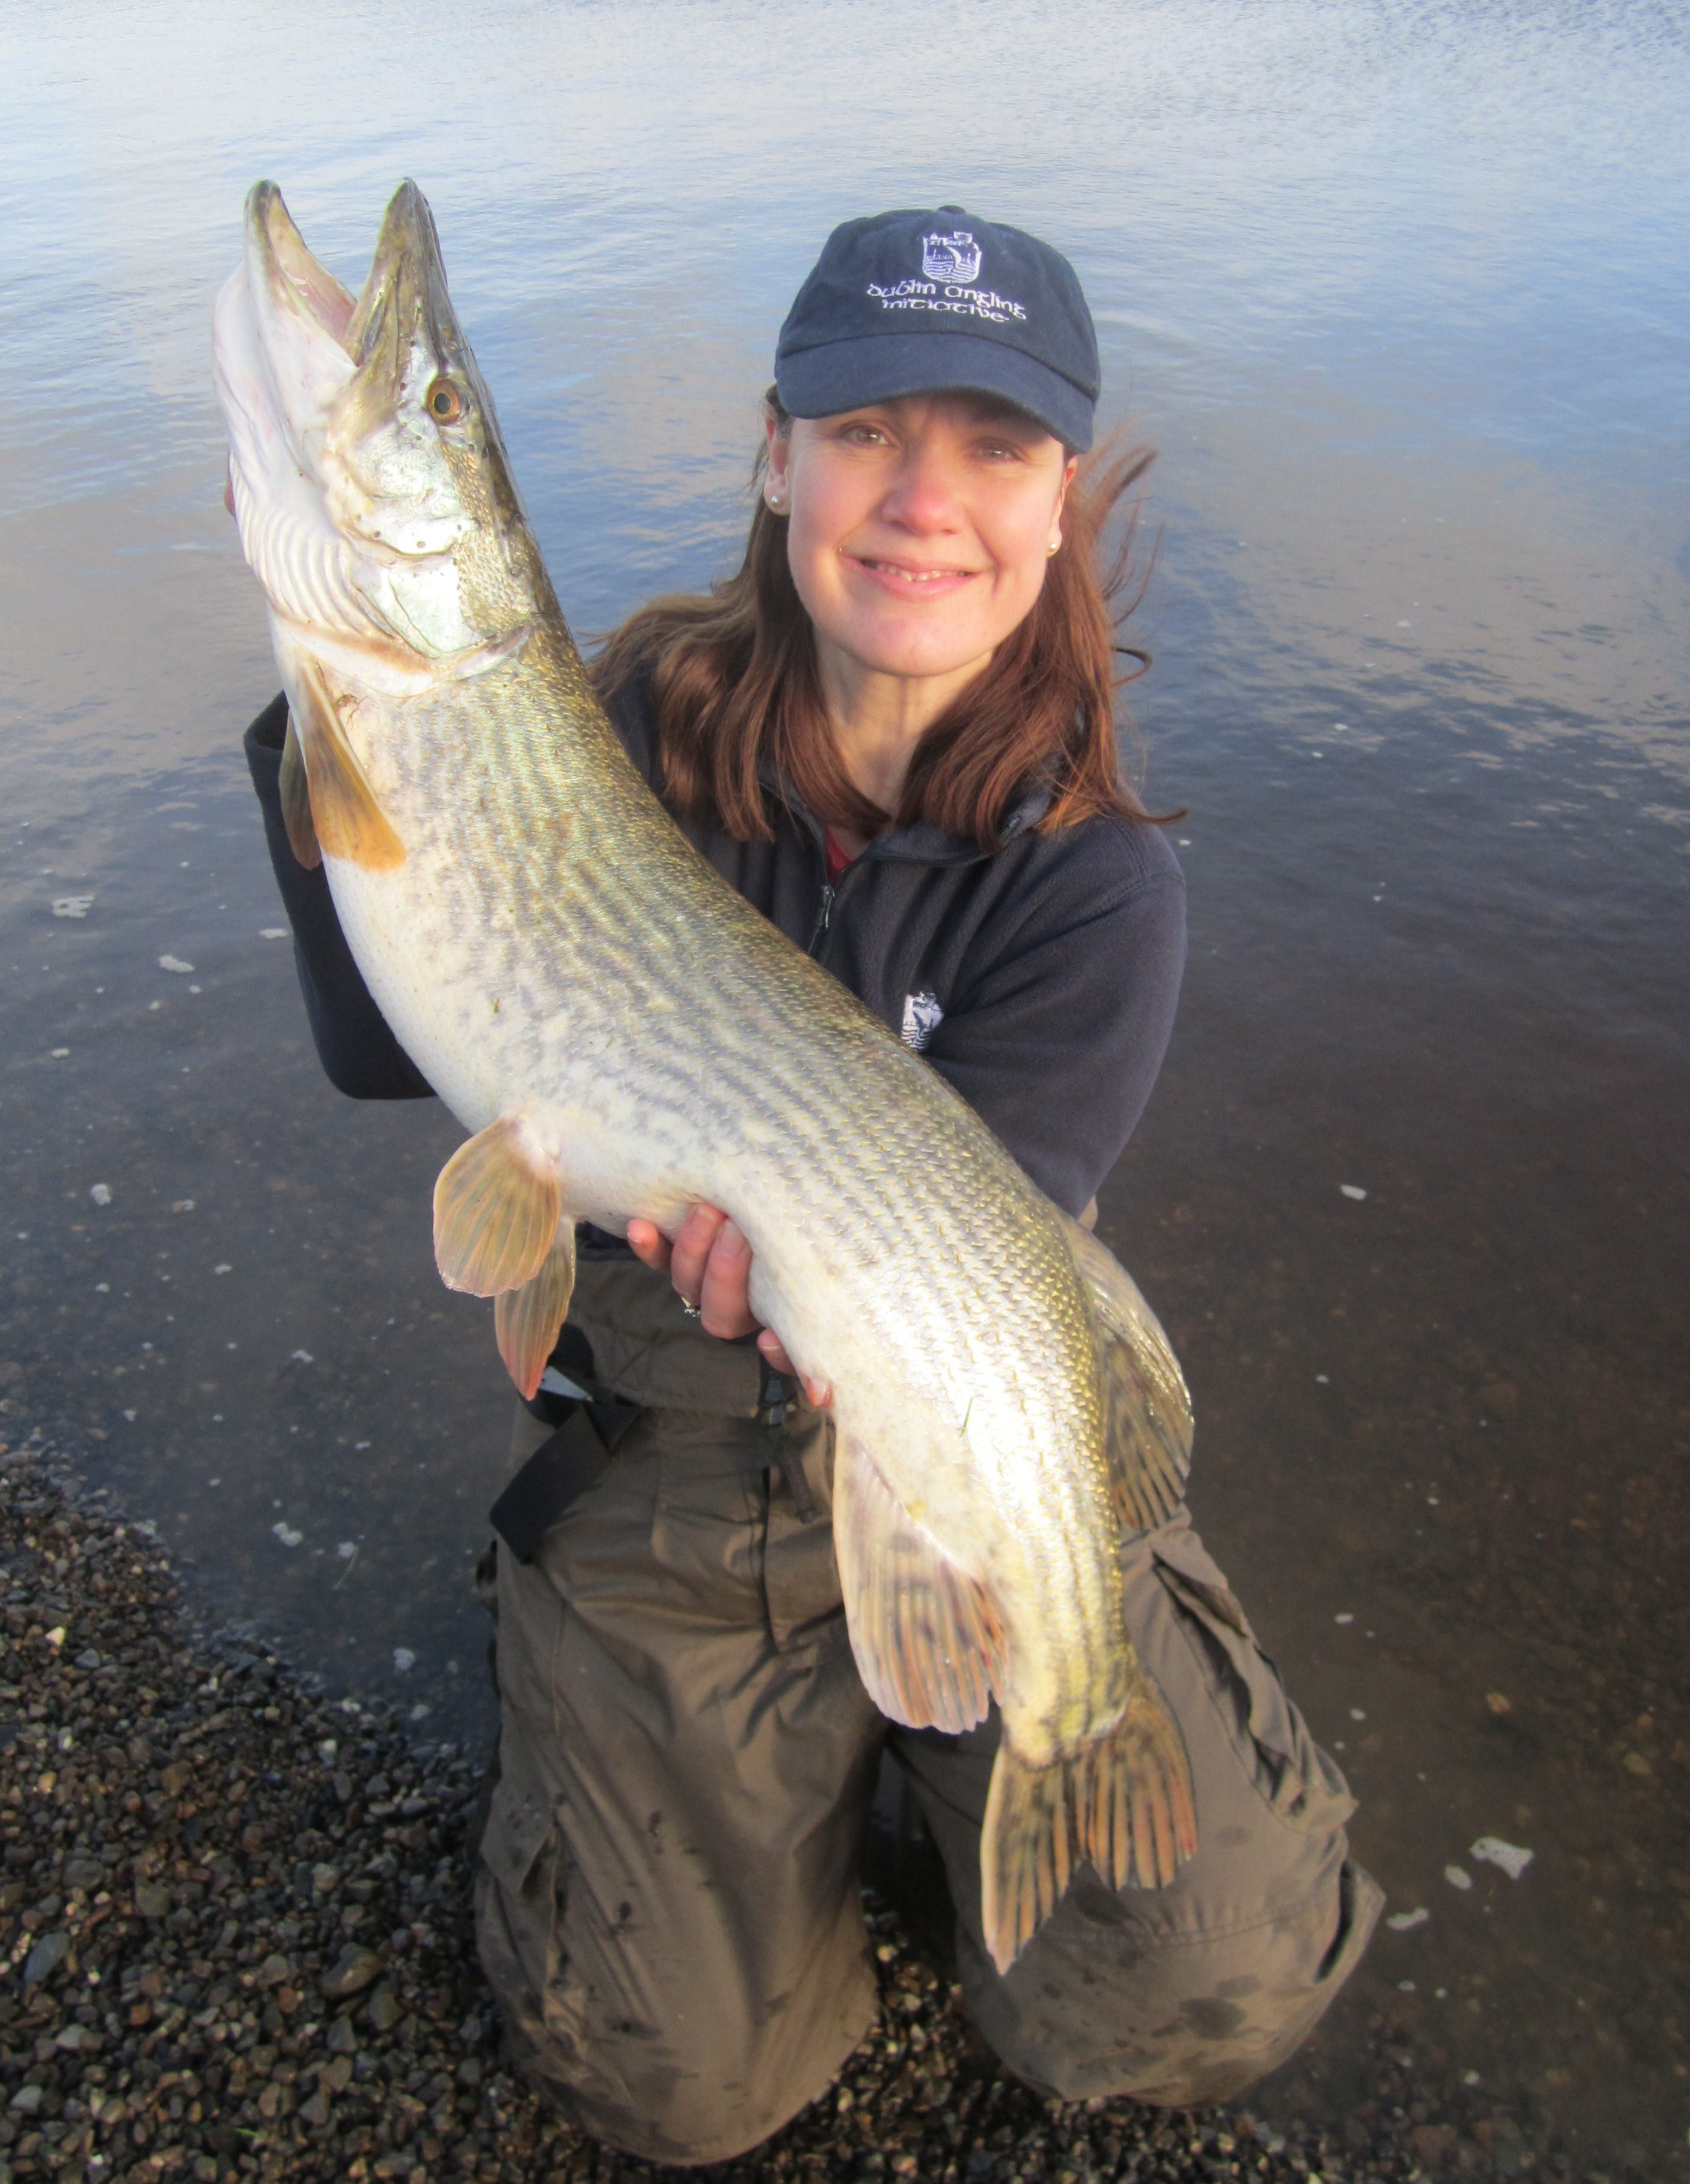 Josie Mahon of Inland Fisheries Ireland with her 17lb 8oz pike from Blessington